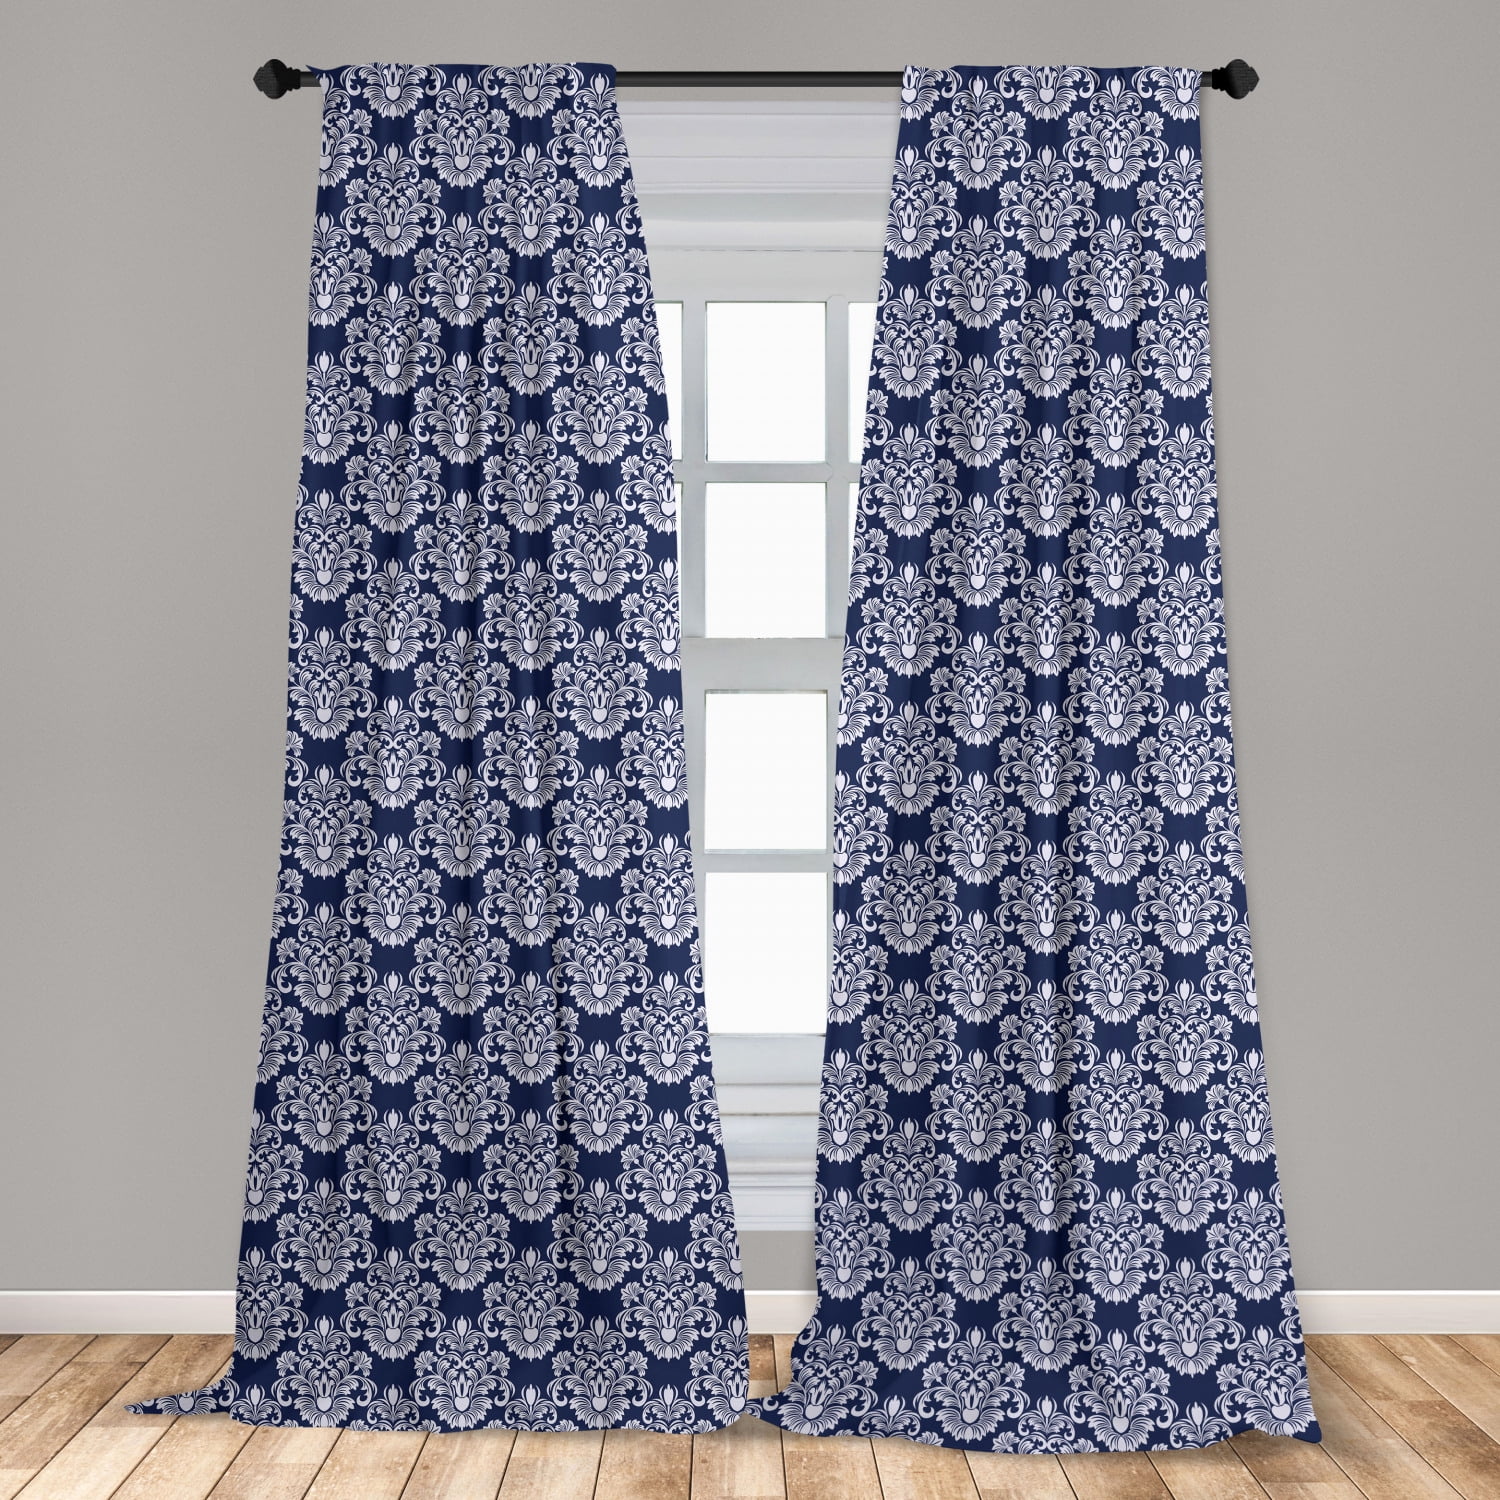 Navy Blue Curtains 2 Panels Set, Abstract Floral Damask ...